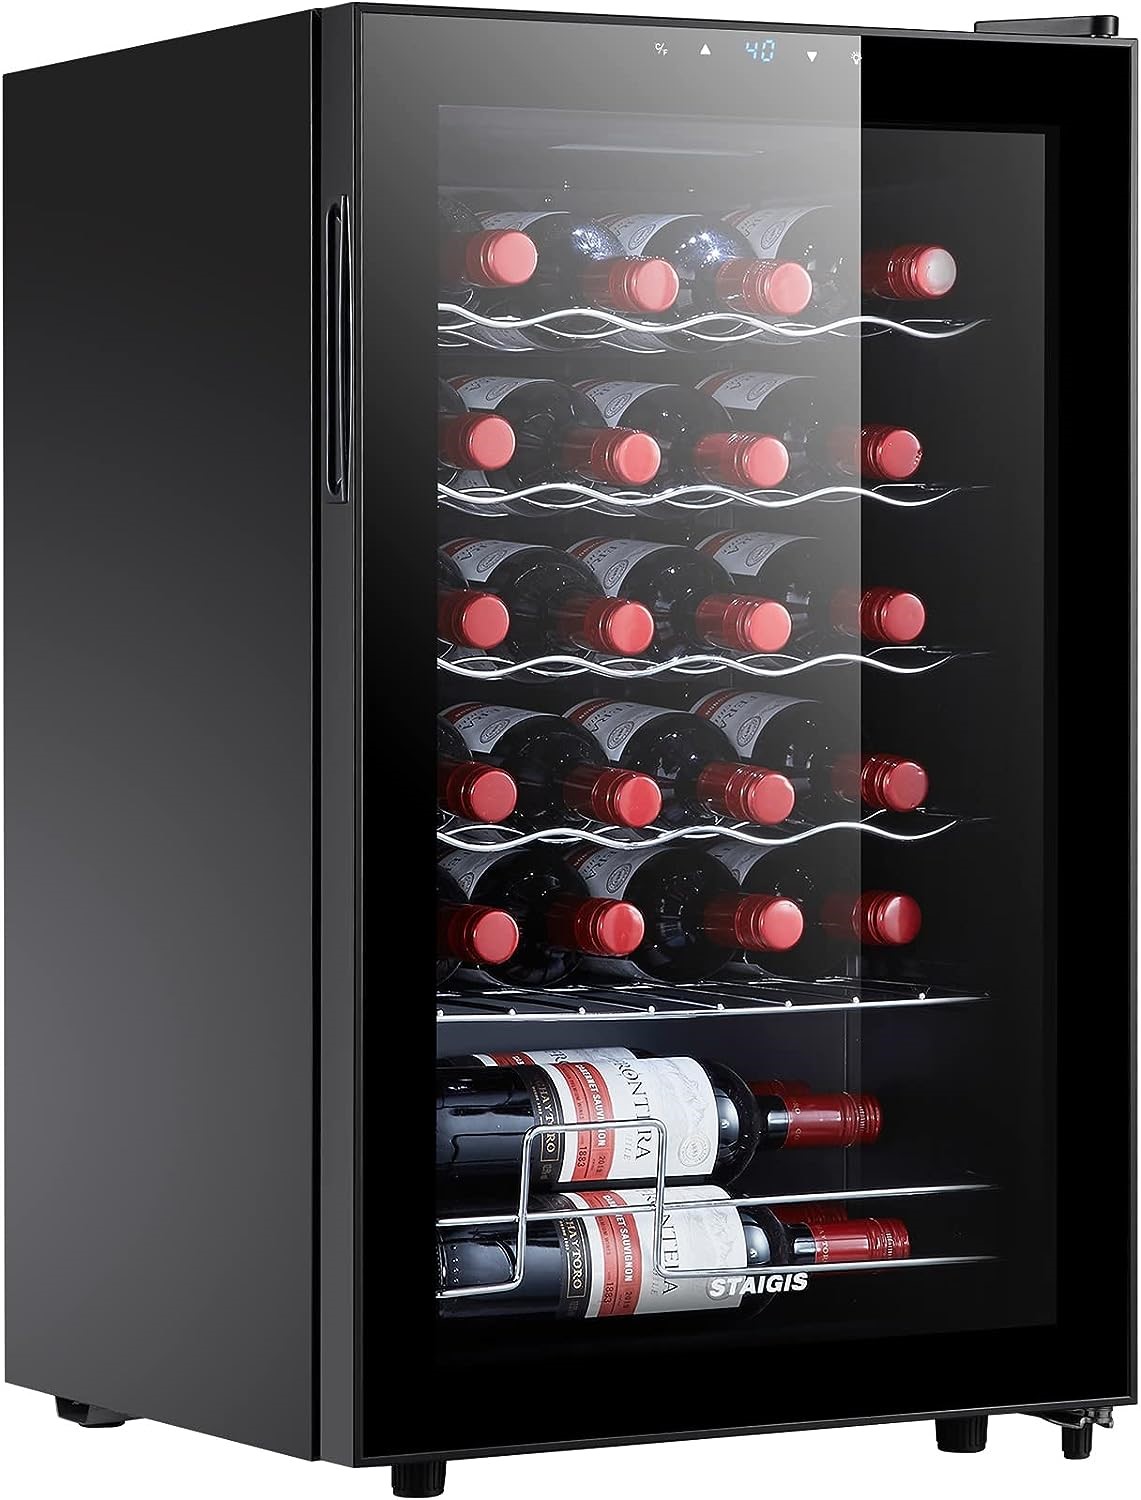 STAIGIS Freestanding Wine Cooling Unit | DeviceDaily.com